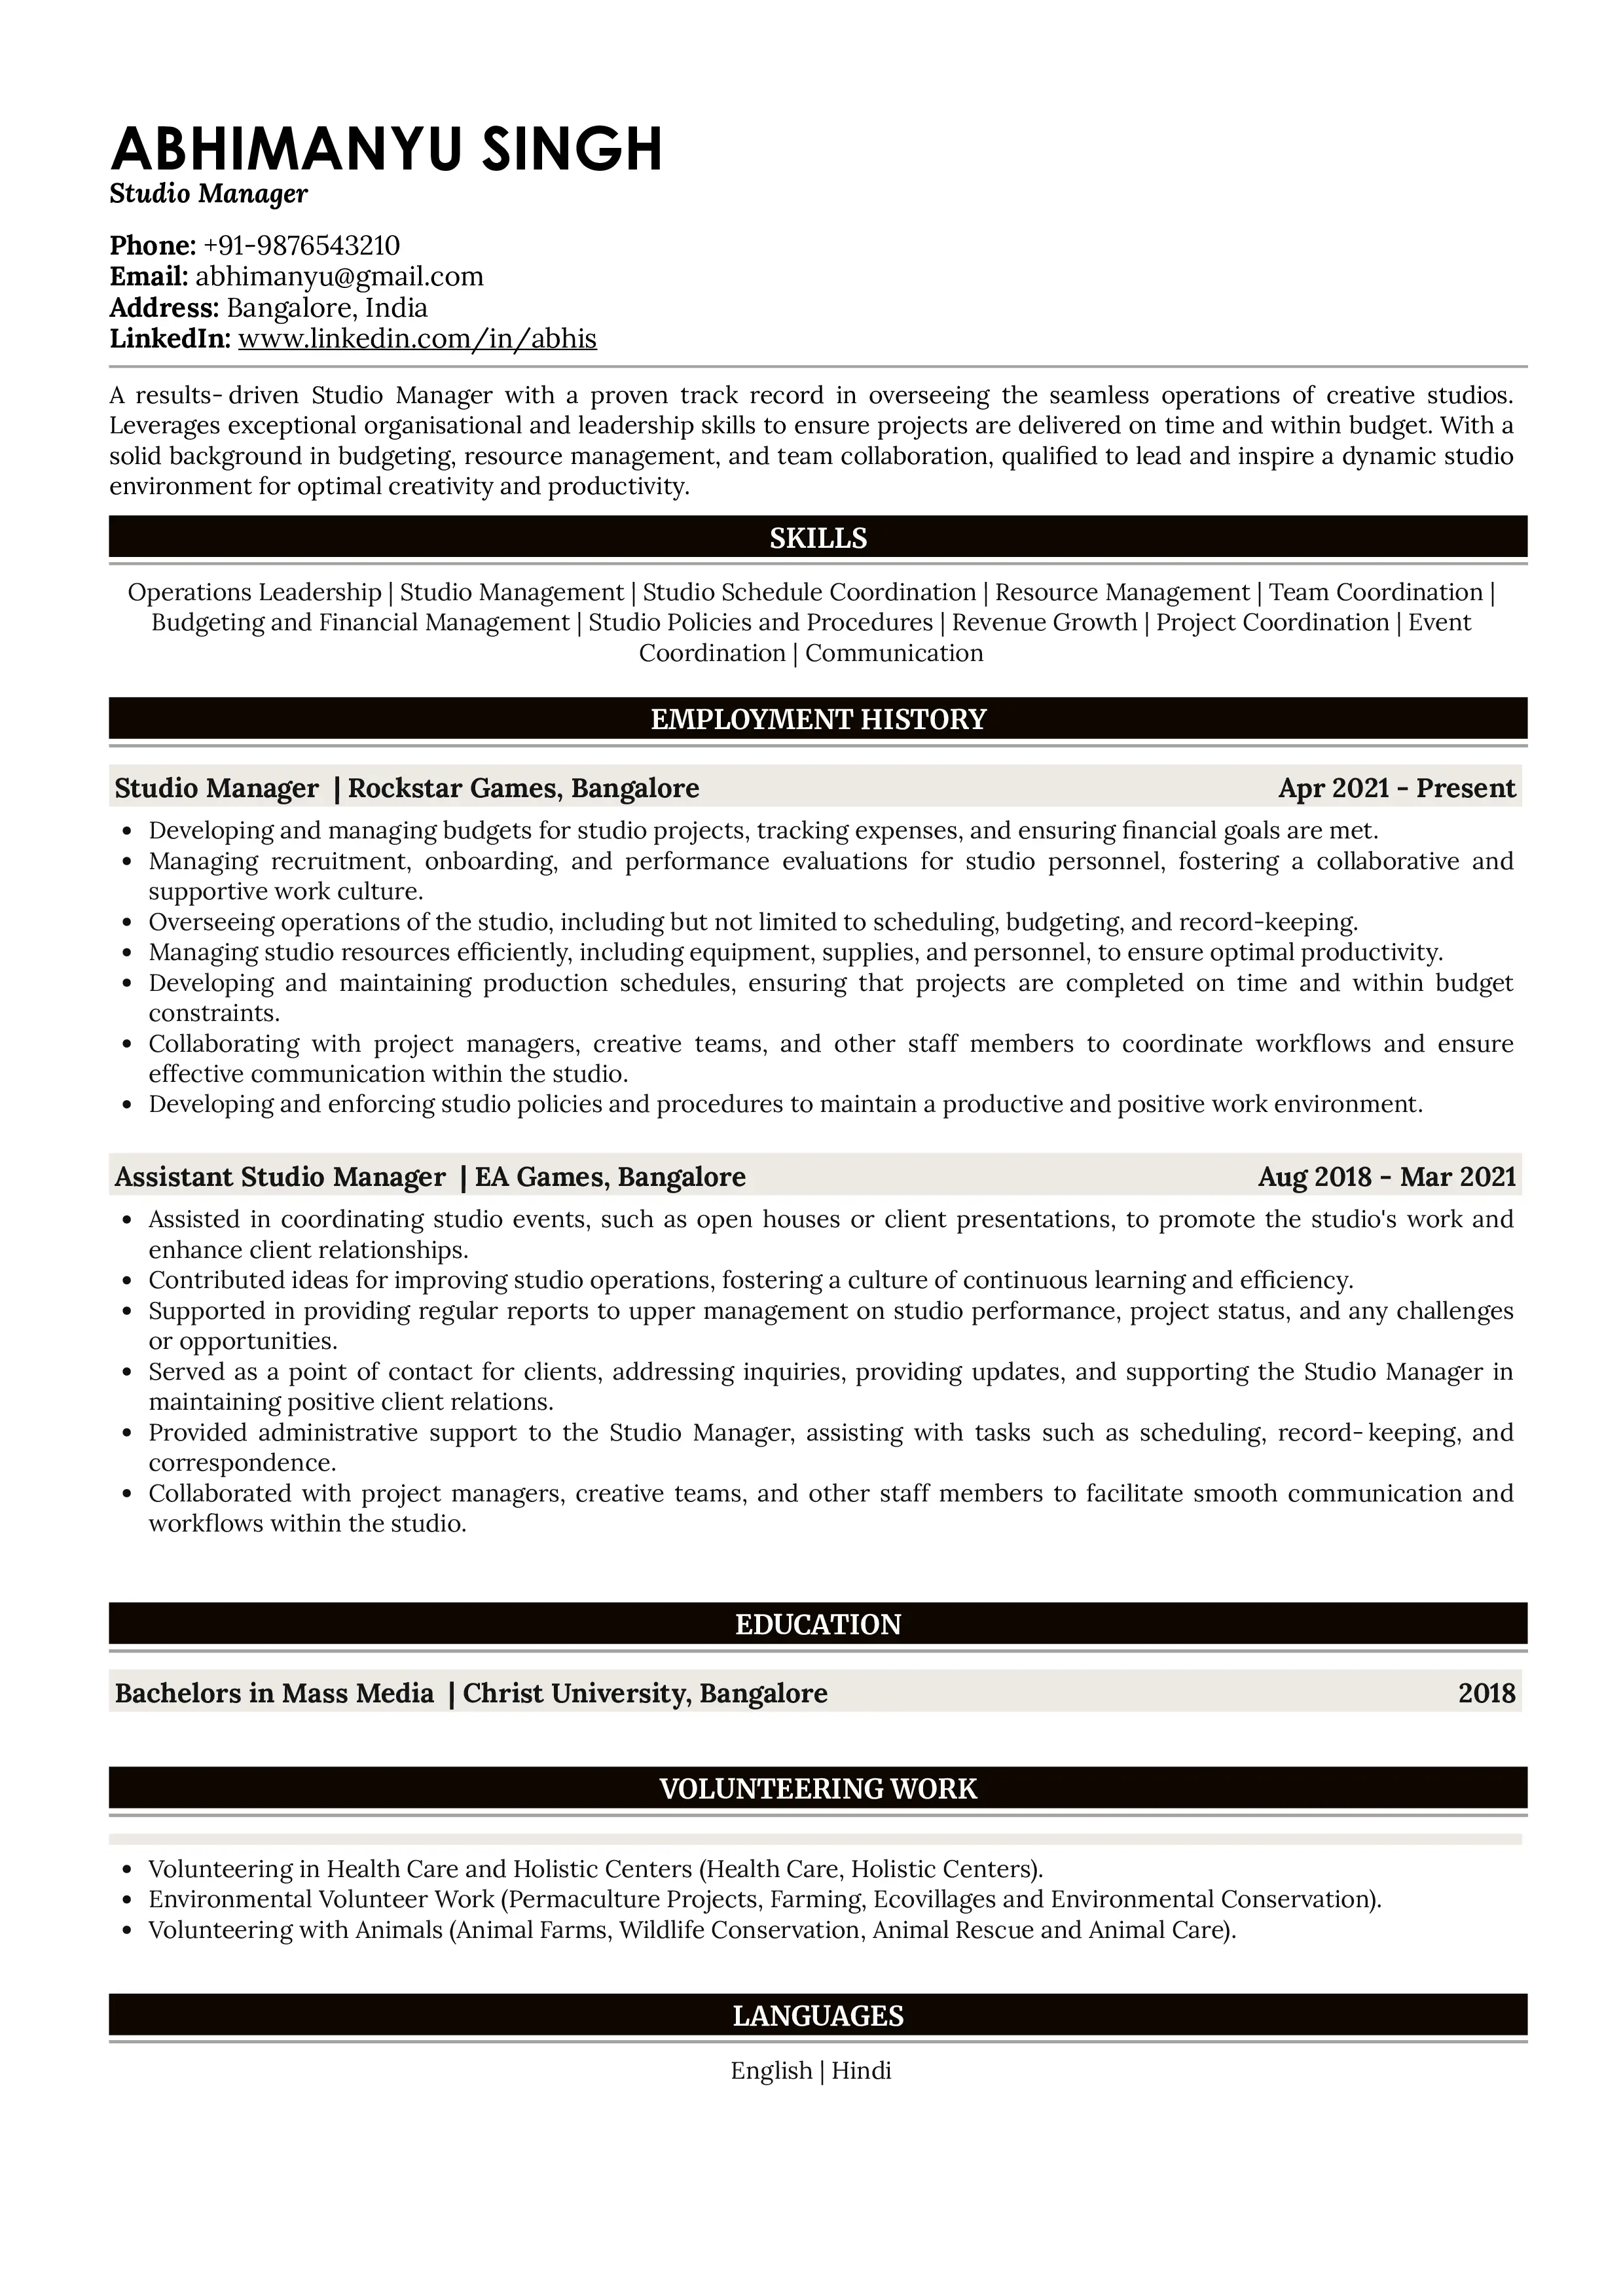 Sample Resume of Studio Manager | Free Resume Templates & Samples on Resumod.co